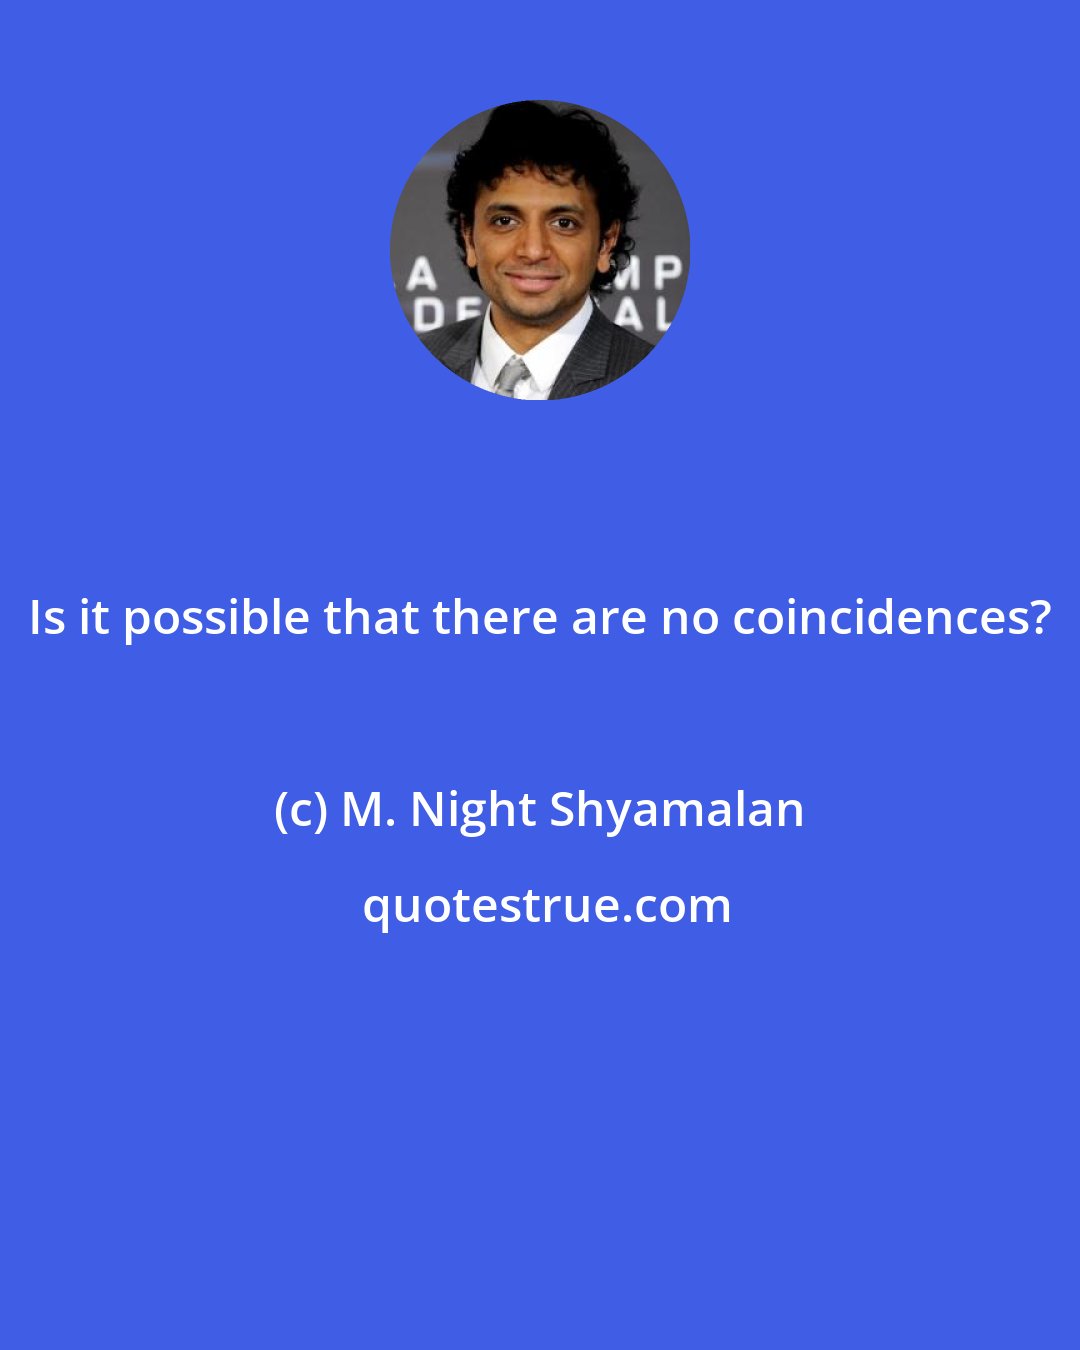 M. Night Shyamalan: Is it possible that there are no coincidences?